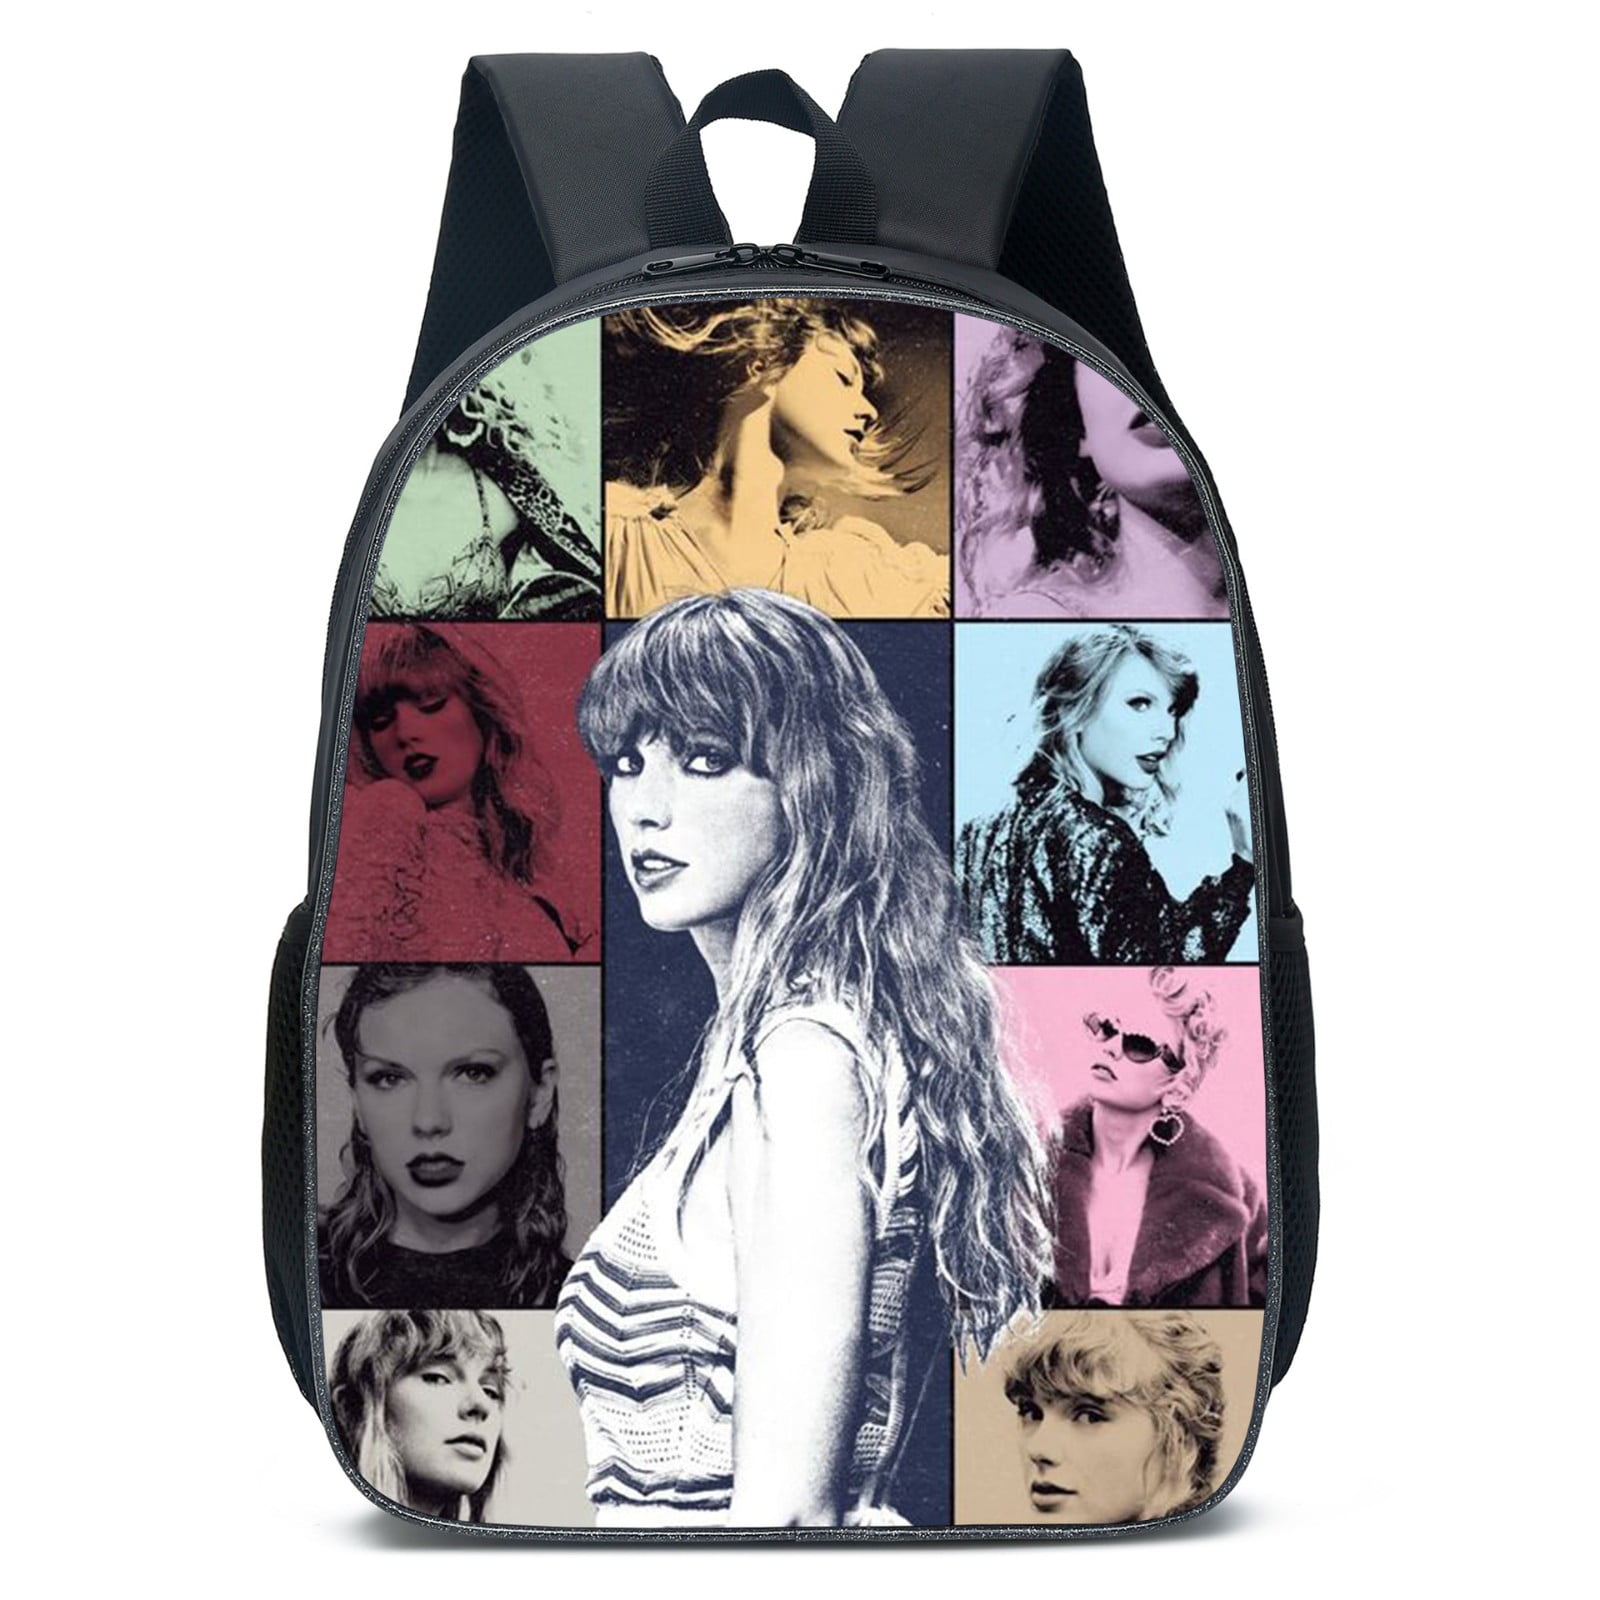 Taylor Swift 1989 Pouch